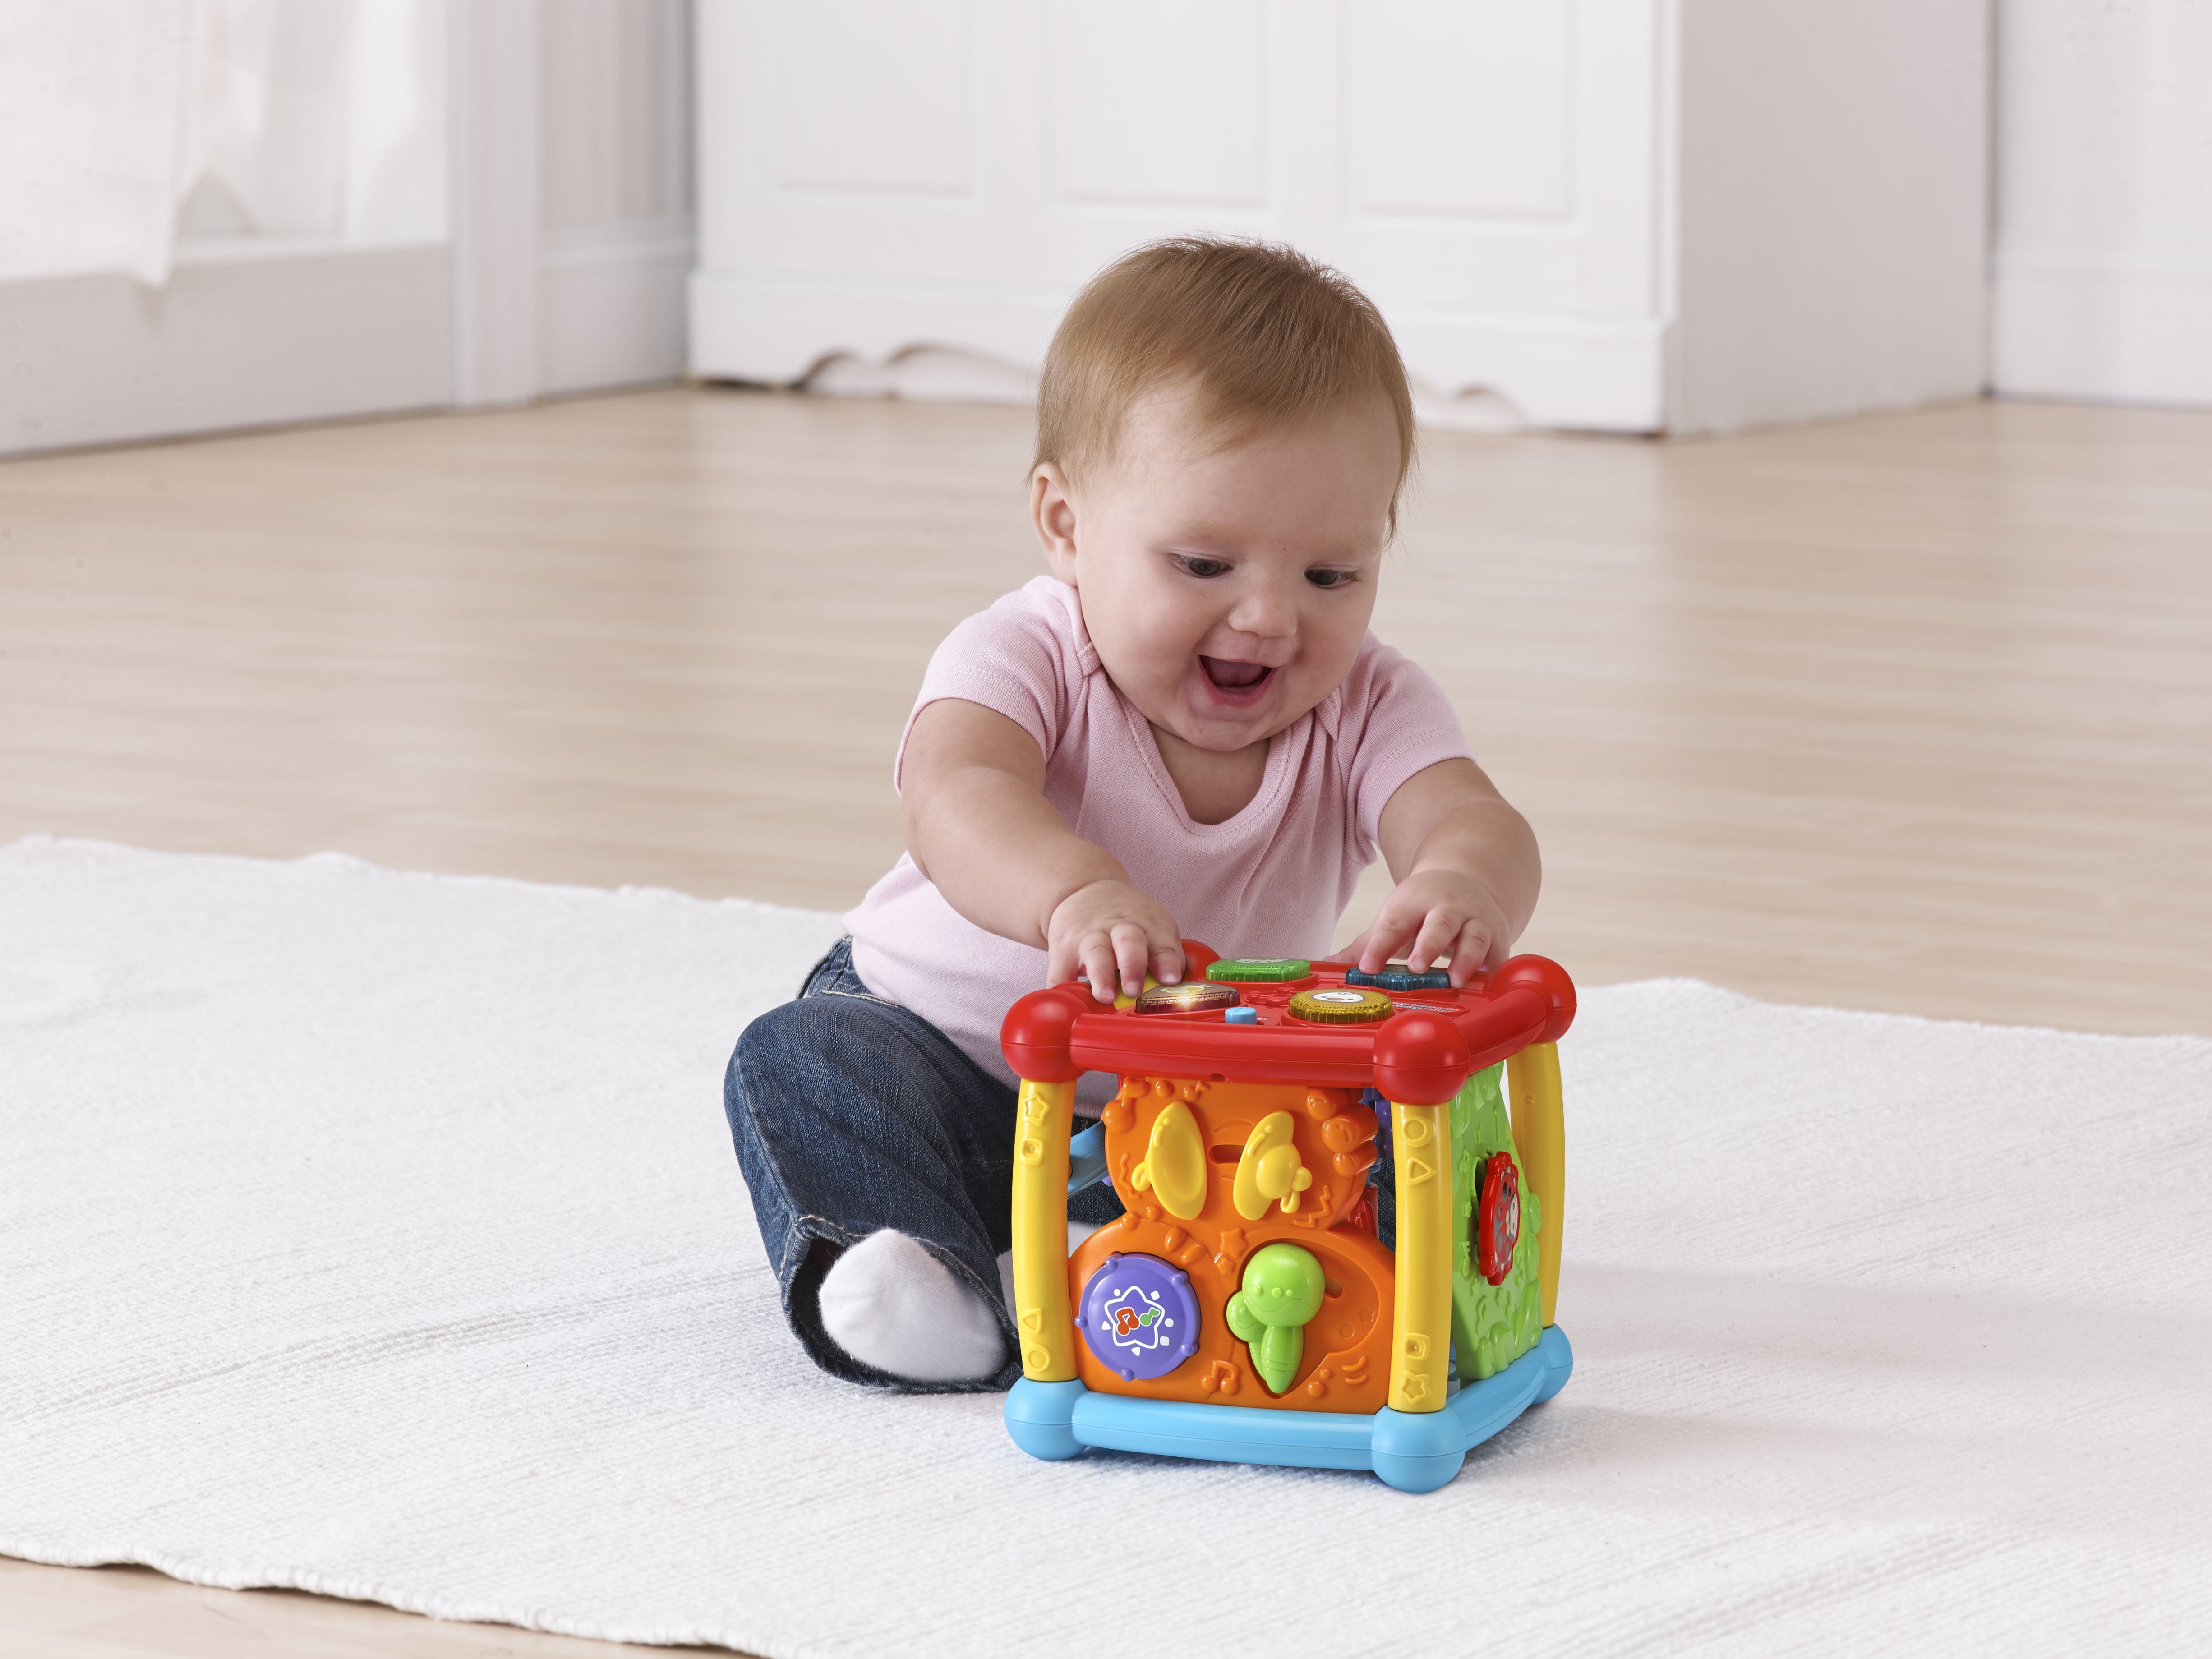 vtech baby learners activity cube